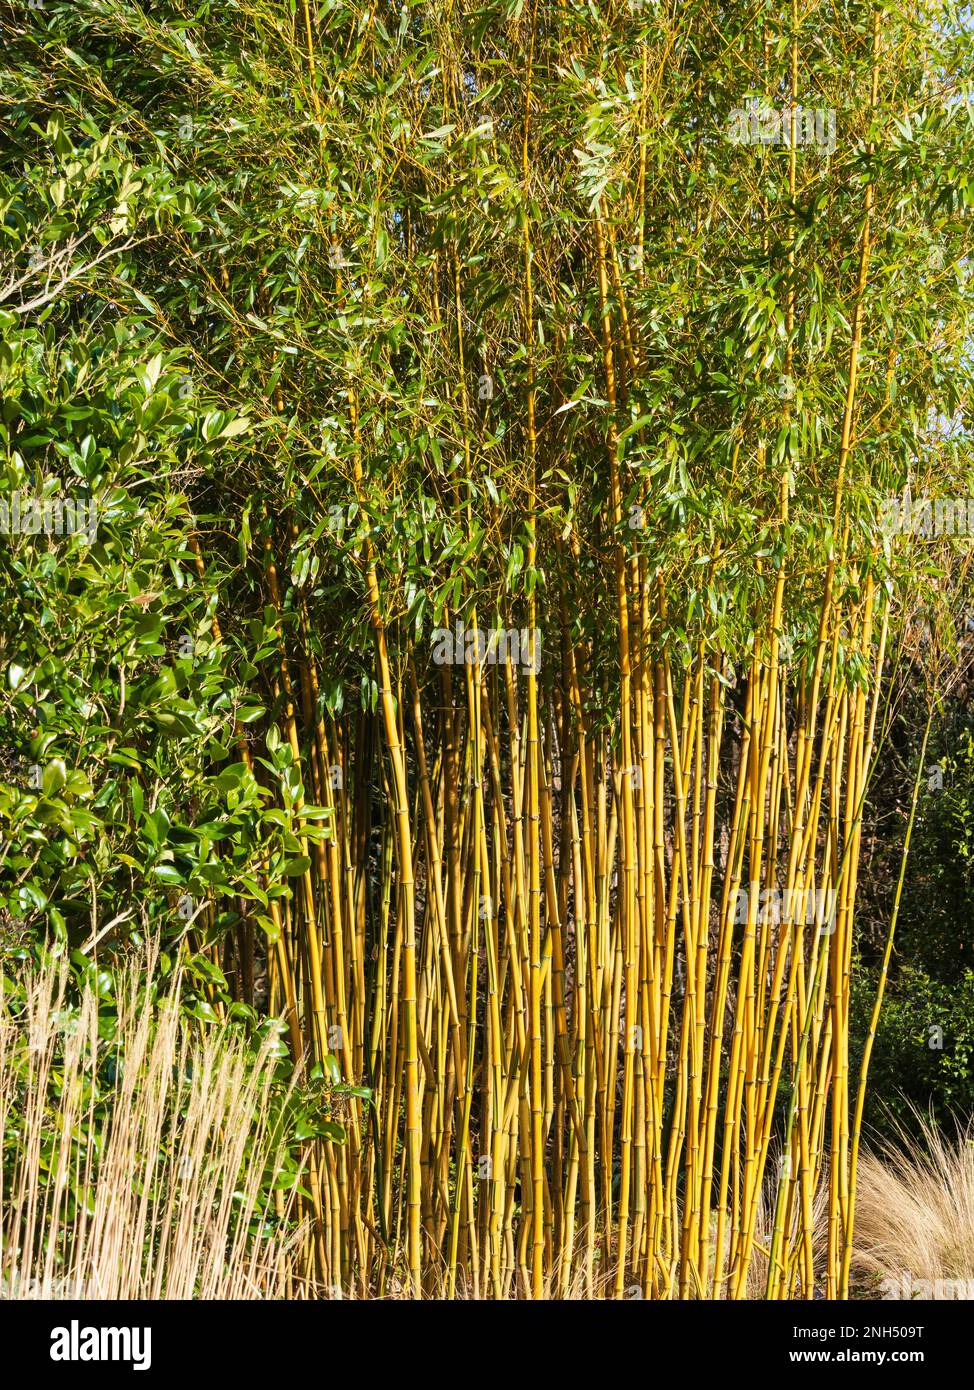 Yellow stripped canes of the hardy ornamental clumping bamboo, Phyllostachys aureosulcata f. spectabilis Stock Photo